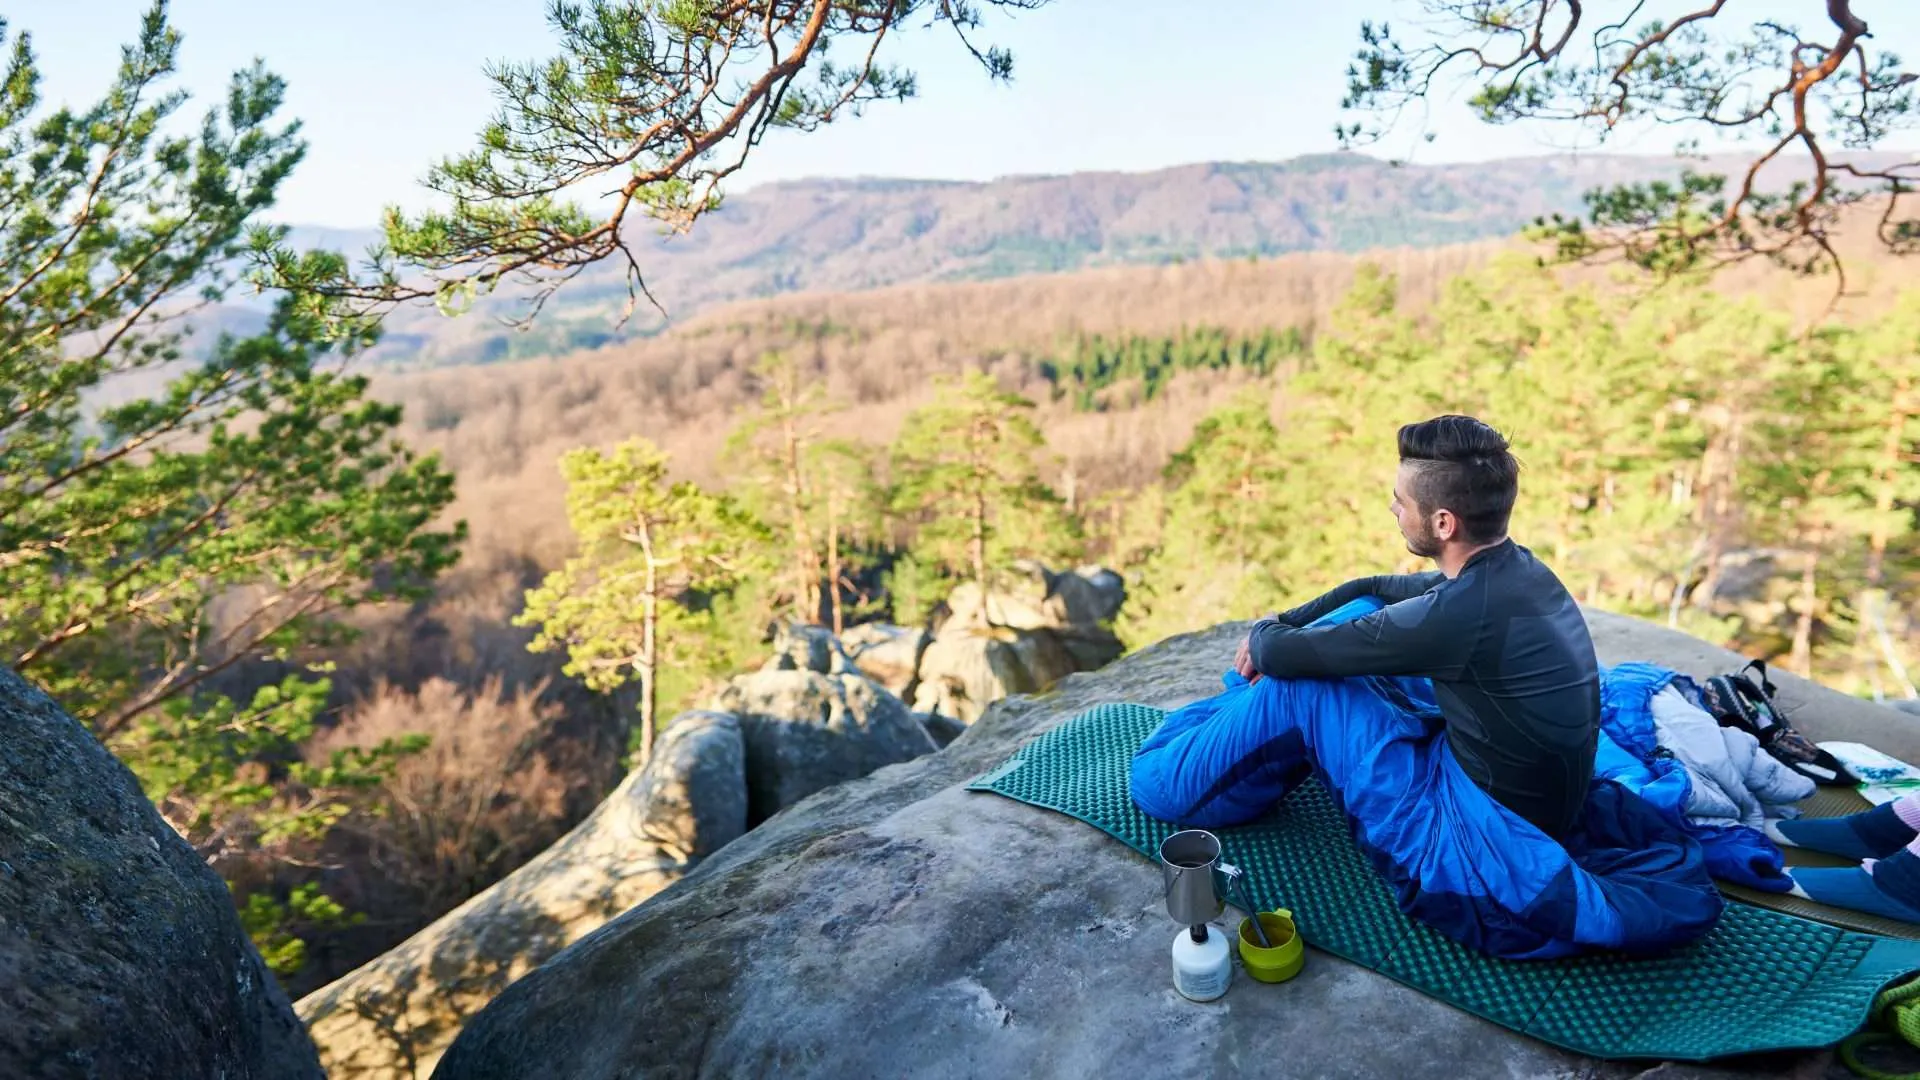 Man sitting inside bivy sack on a cliff looking out at forest